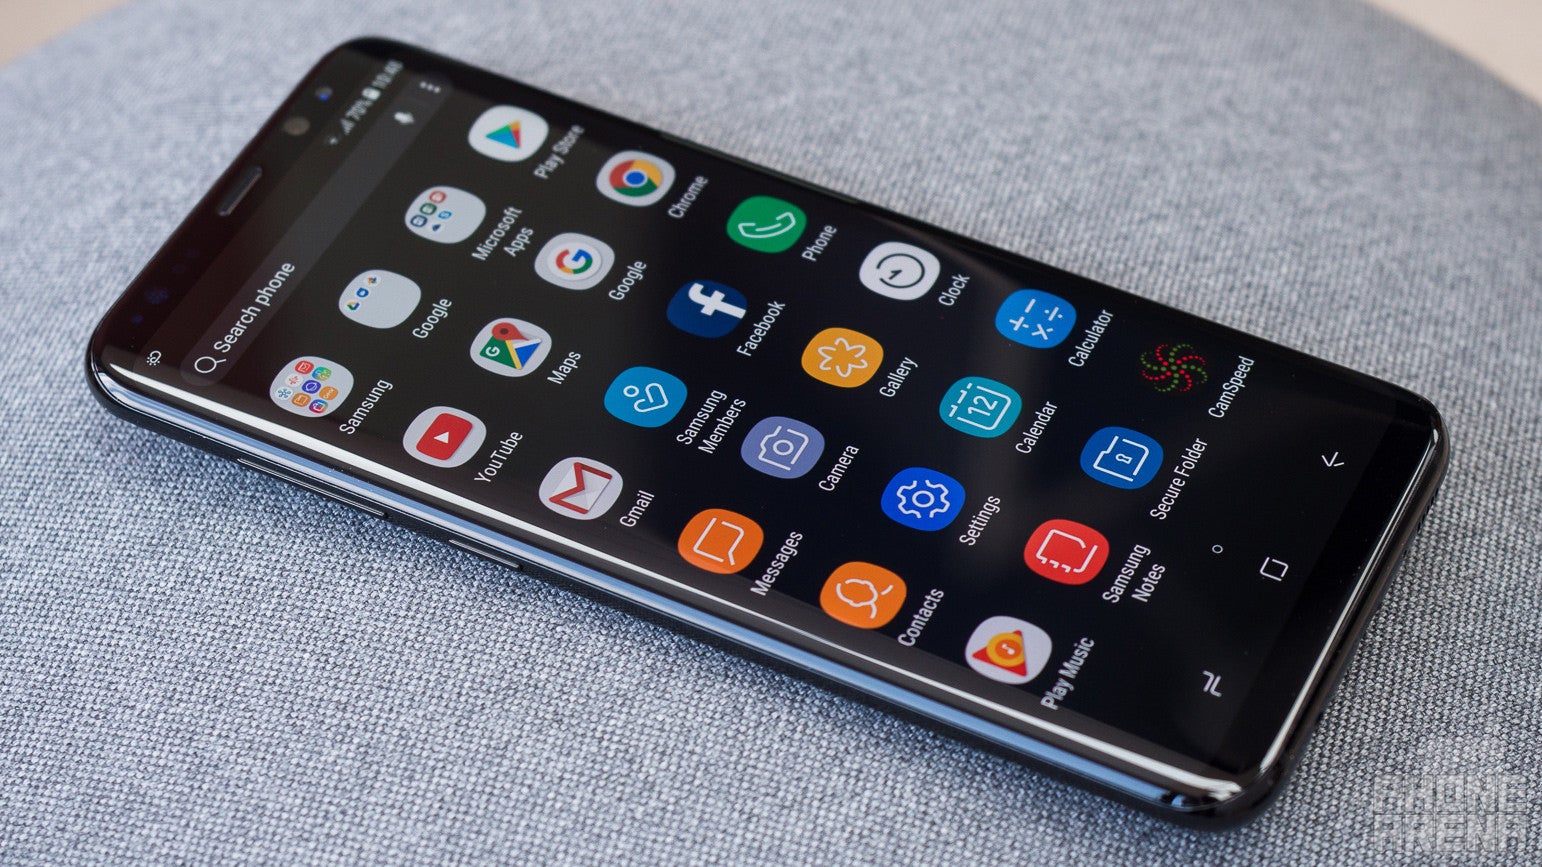 Samsung Galaxy S8+ Review